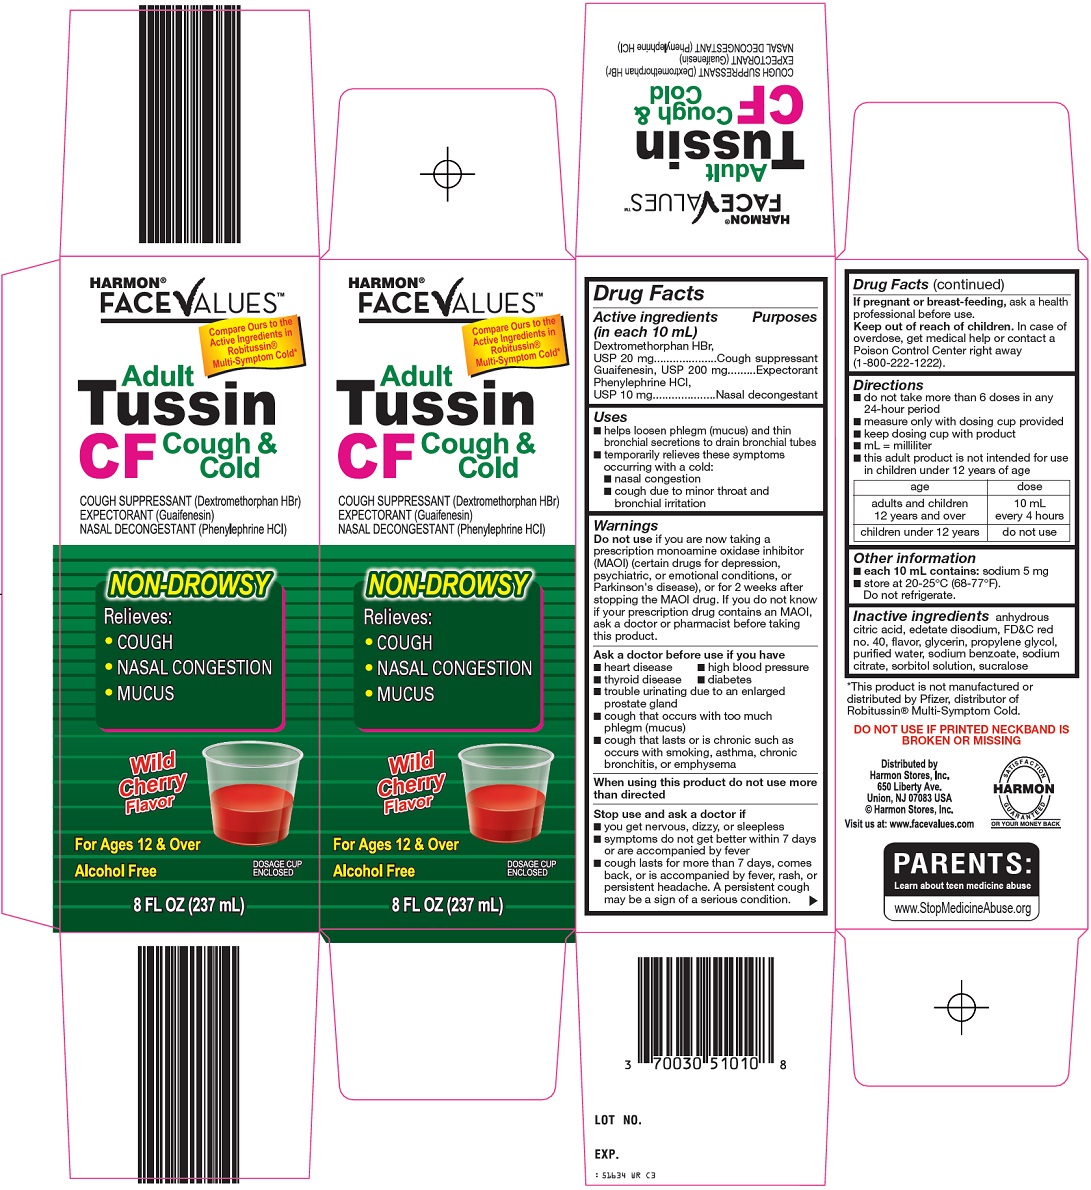 Harmon Face Values Adult Tussin CF Cough & Cold Image